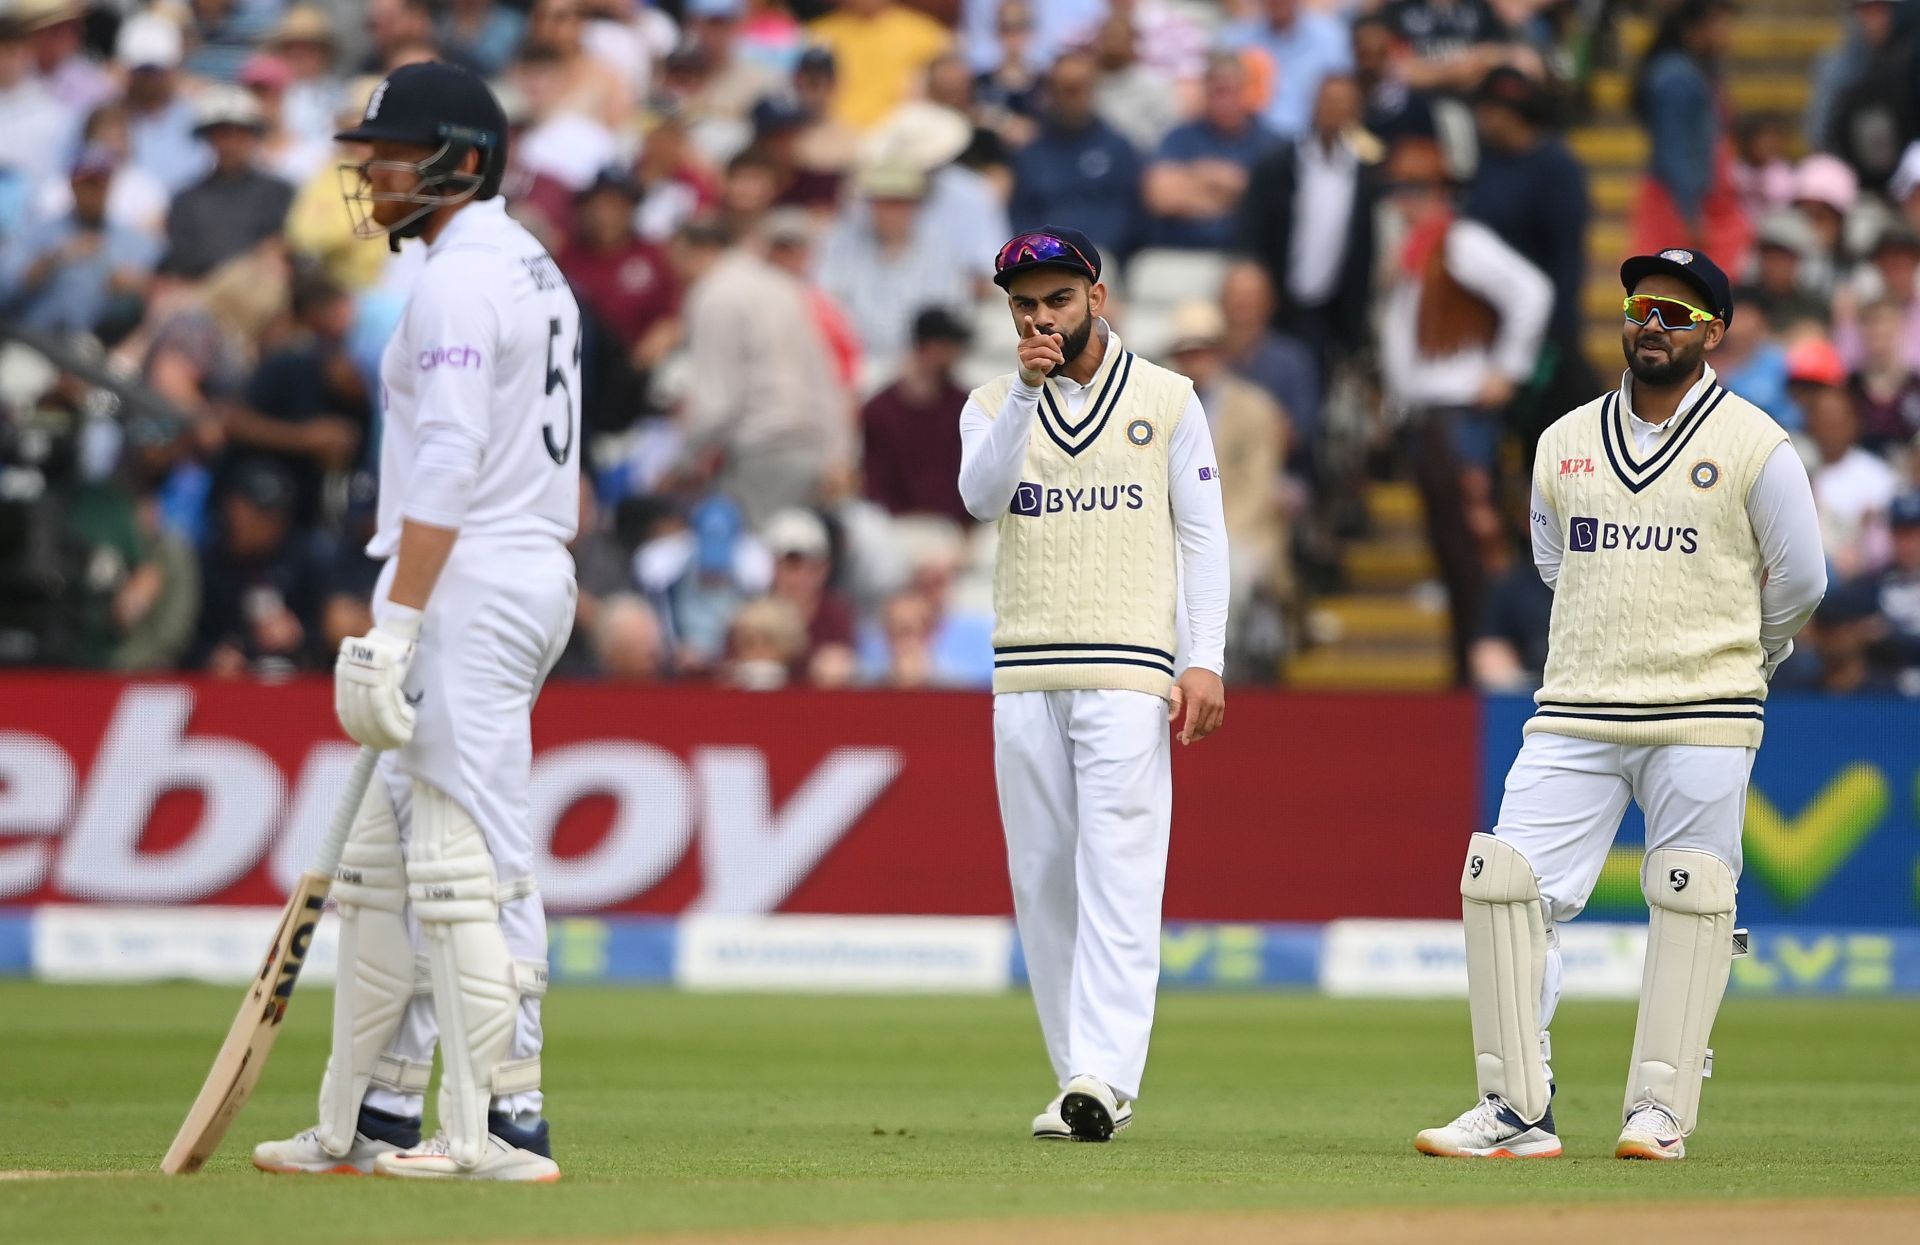 Virat Kohli exchanged some words with Jonny Bairstow during the rescheduled Test in Birmingham. (Pic: Getty Images)